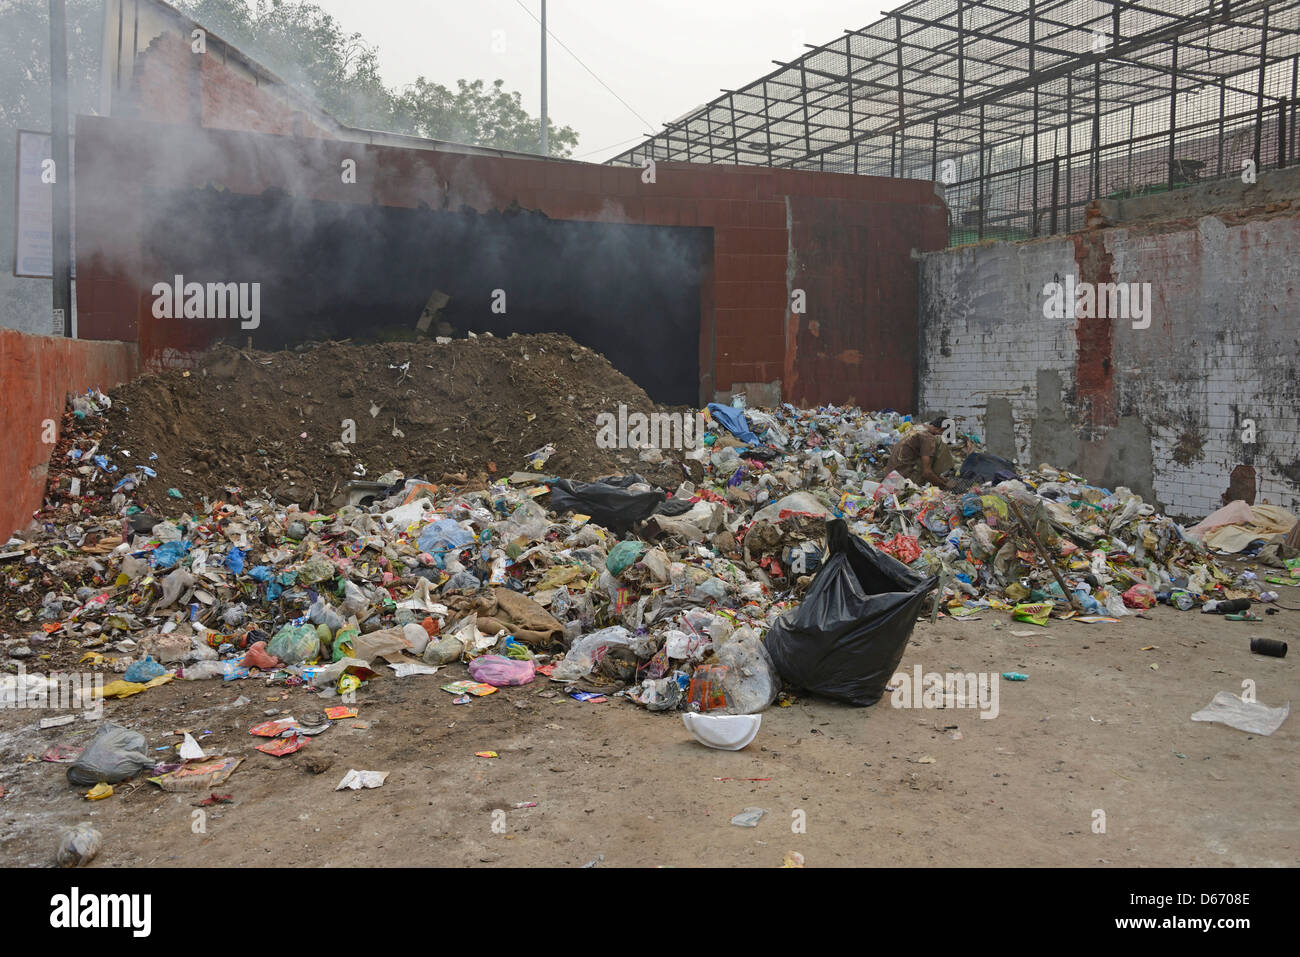 A burning pile of street rubbish in a slum area of Old Delhi in India Stock Photo